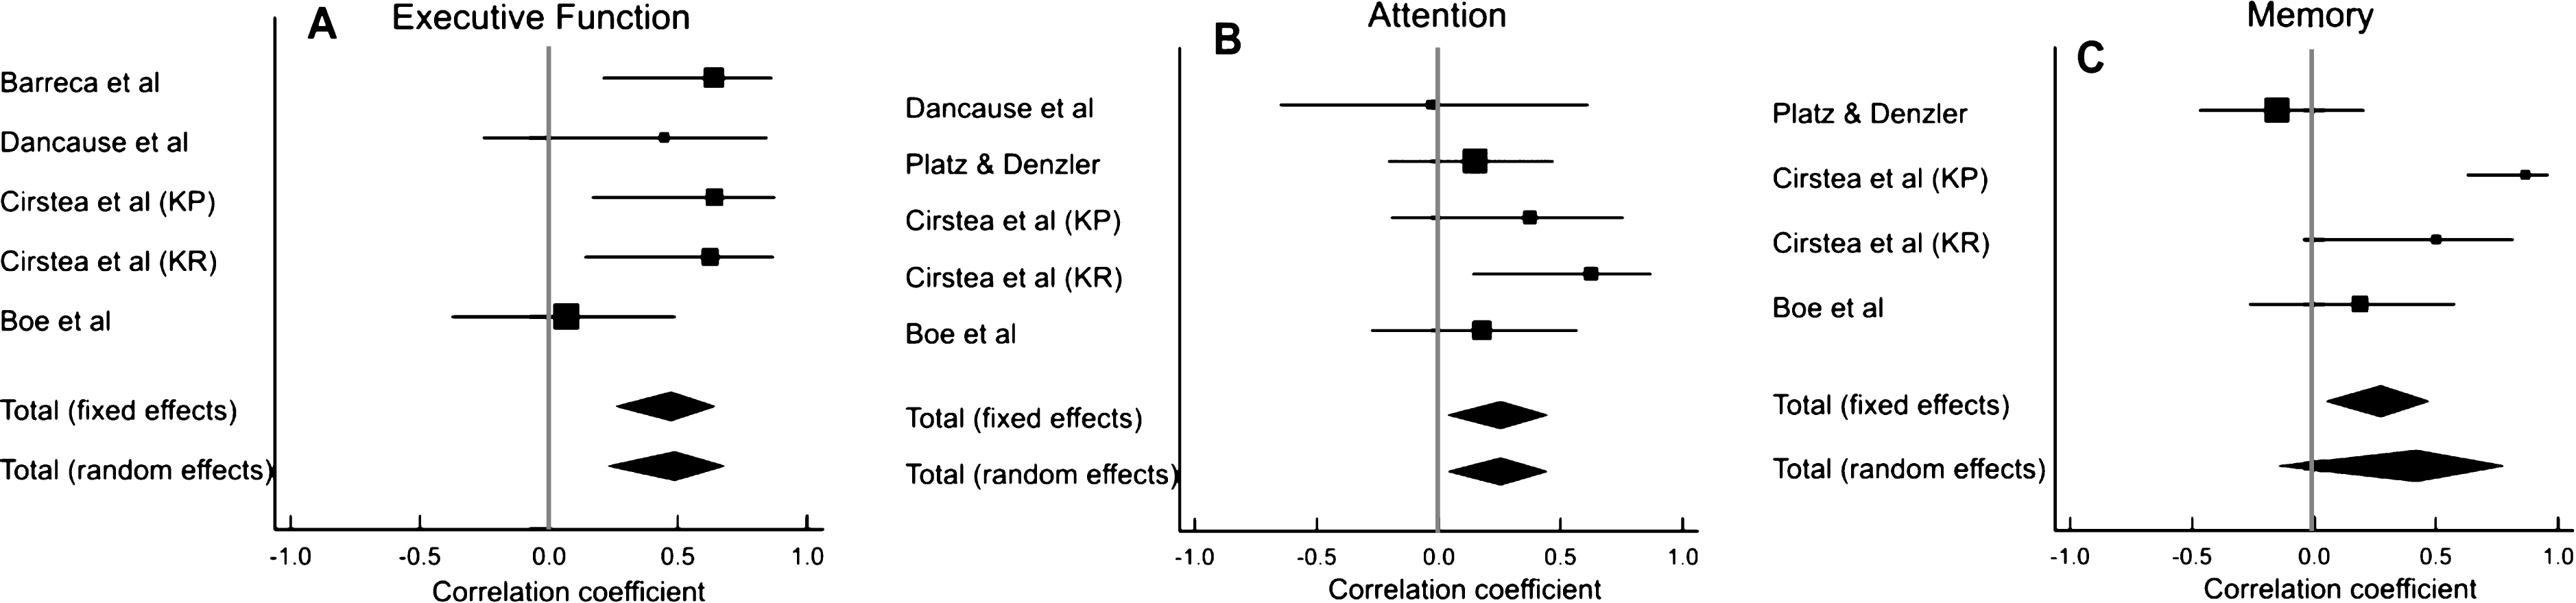 Results of meta-analyses examining the correlation between arm motor improvement and (A) executive function, (B) attention and (C) memory. Larger squares represent larger study effect sizes. Diamonds indicate pooled effects of results of individual studies. Diamond location indicates the estimated effect size and diamond width reflects the precision of the estimate.